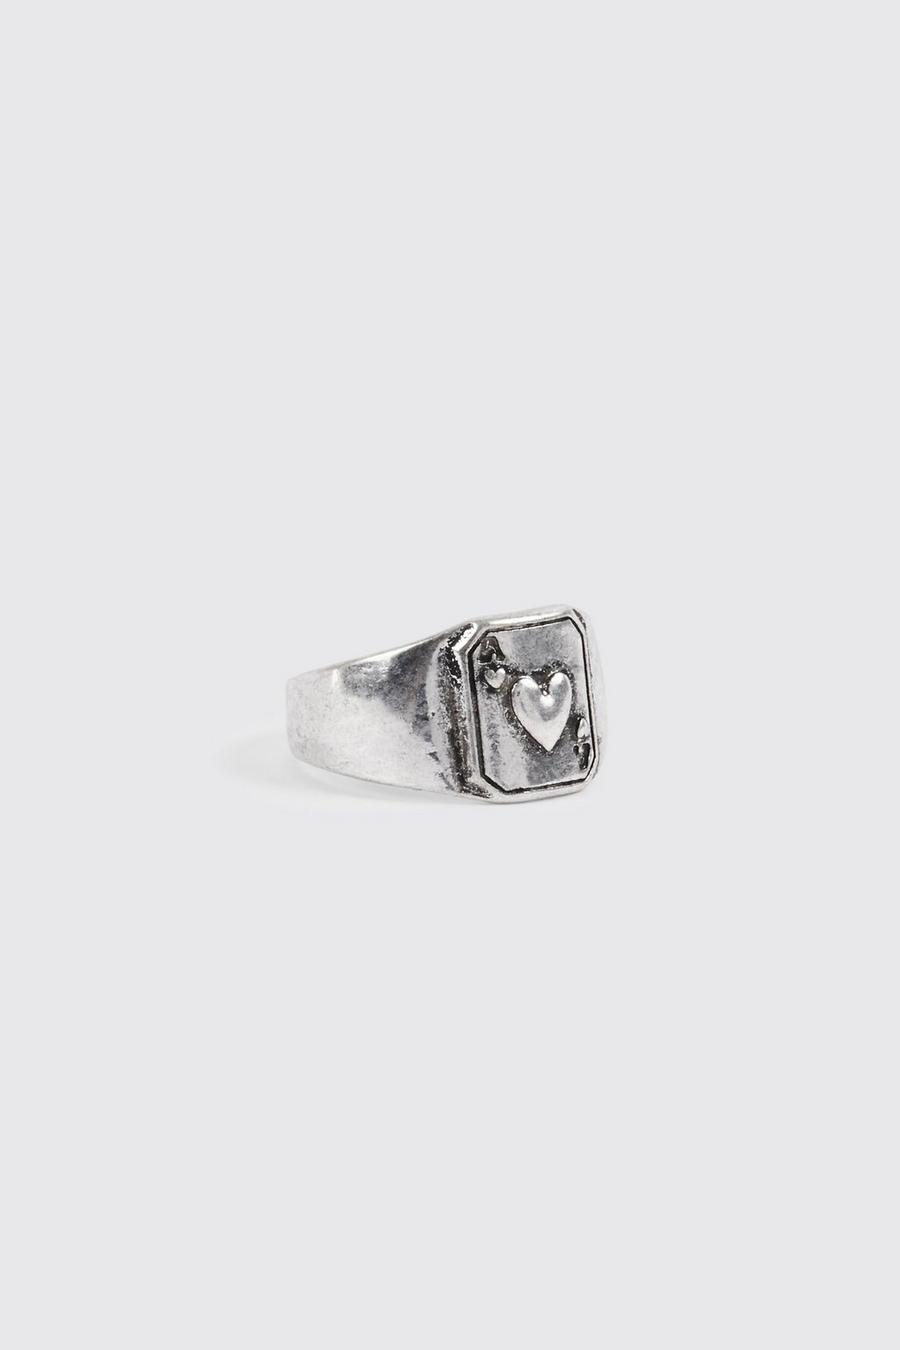 Silver Ace Of Hearts Signet Ring In Gift Bag